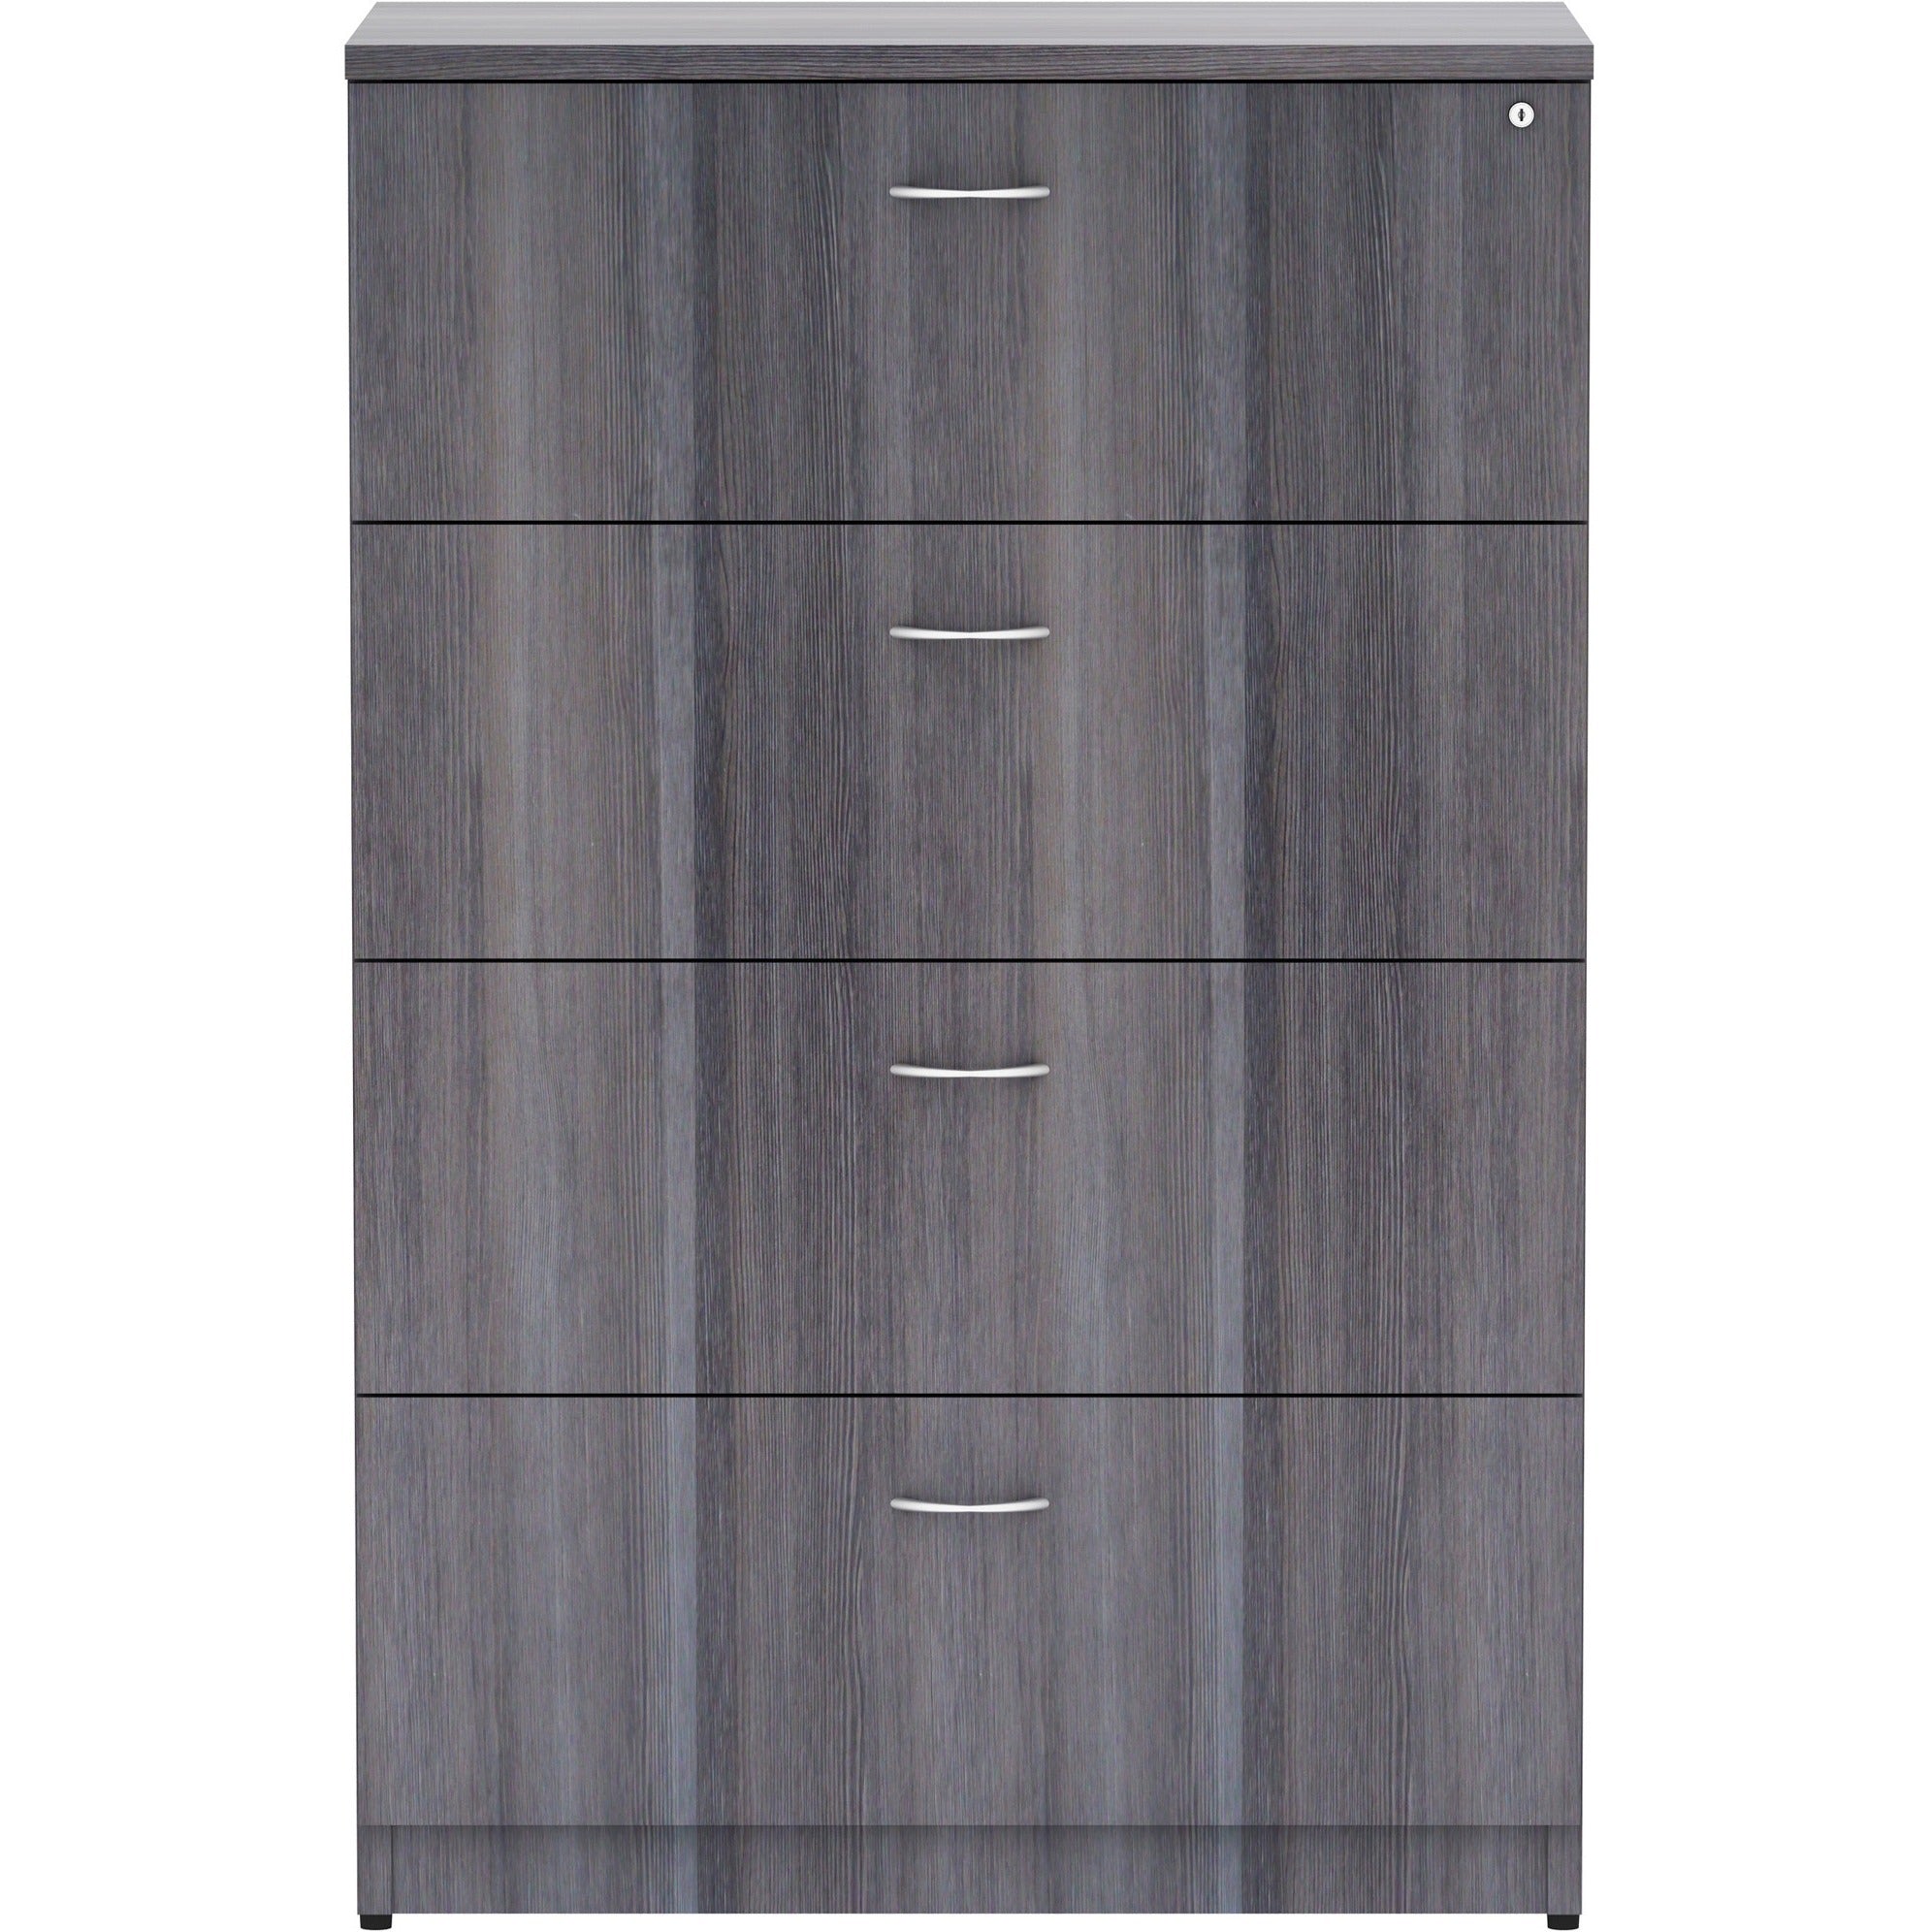 lorell-essentials-series-4-drawer-lateral-file-355-x-22548-lateral-file-1-top-4-x-file-drawers-finish-weathered-charcoal-laminate_llr69624 - 2